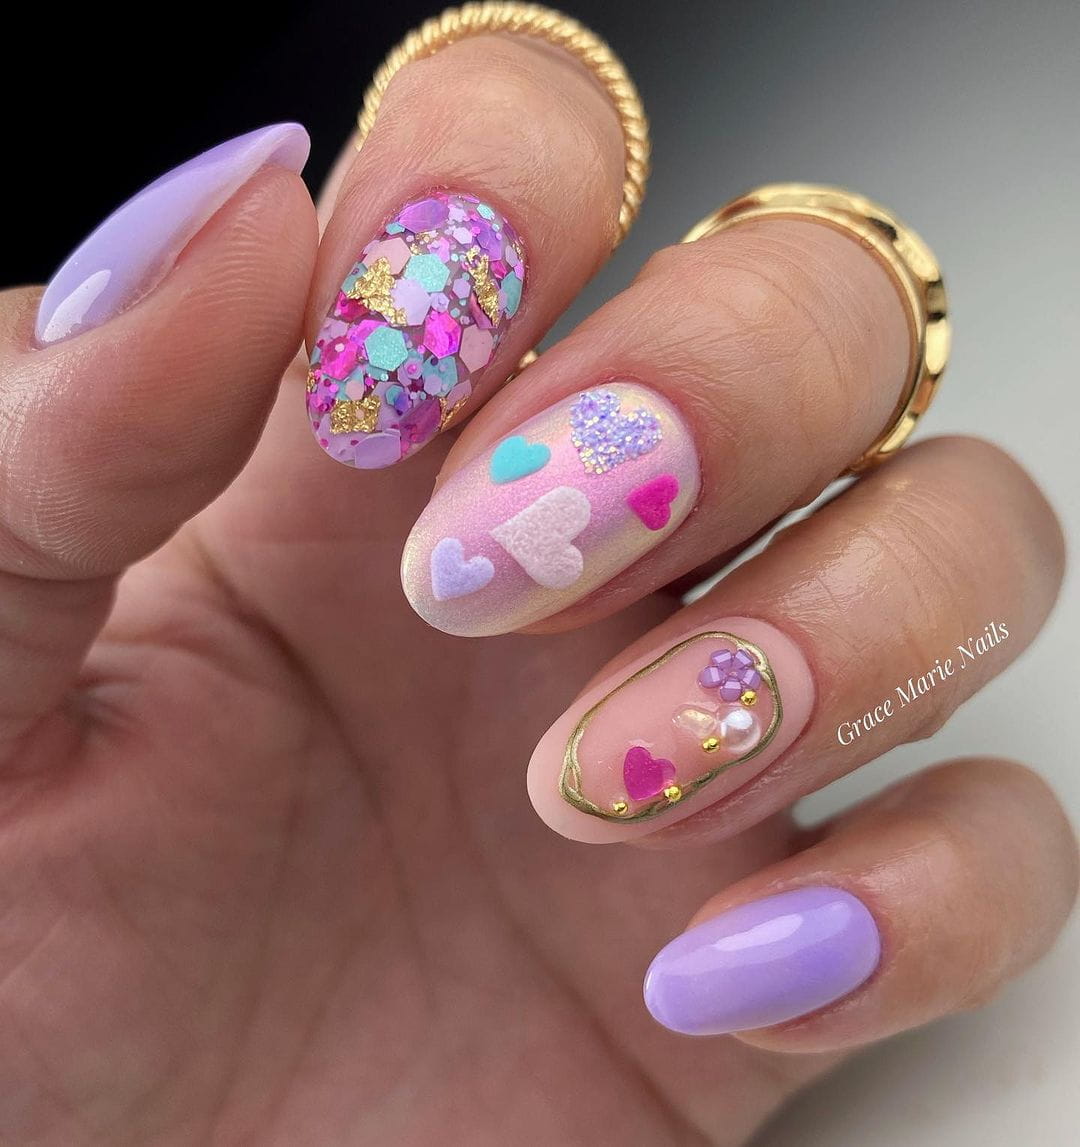 100 Pretty Spring Nail Designs To Try This Year images 14